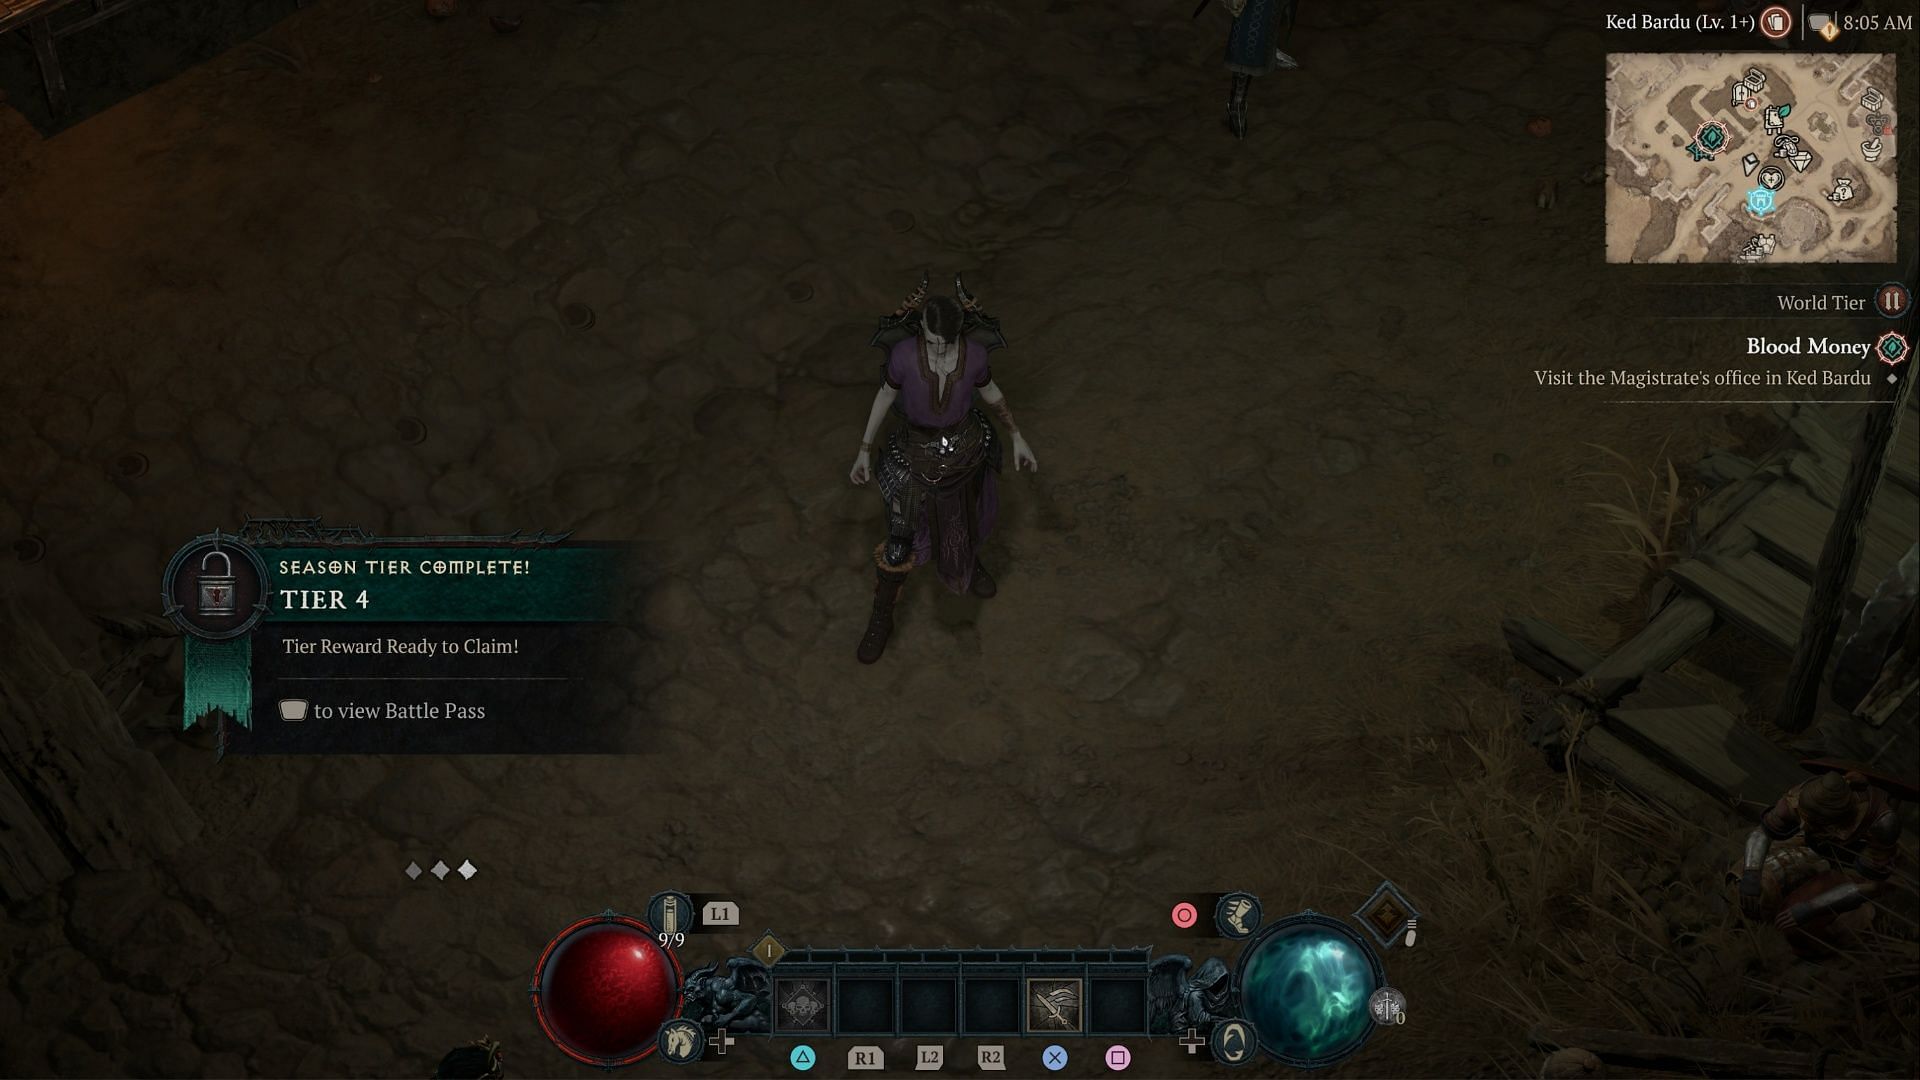 Vampiric powers are awesome in Diablo 4.